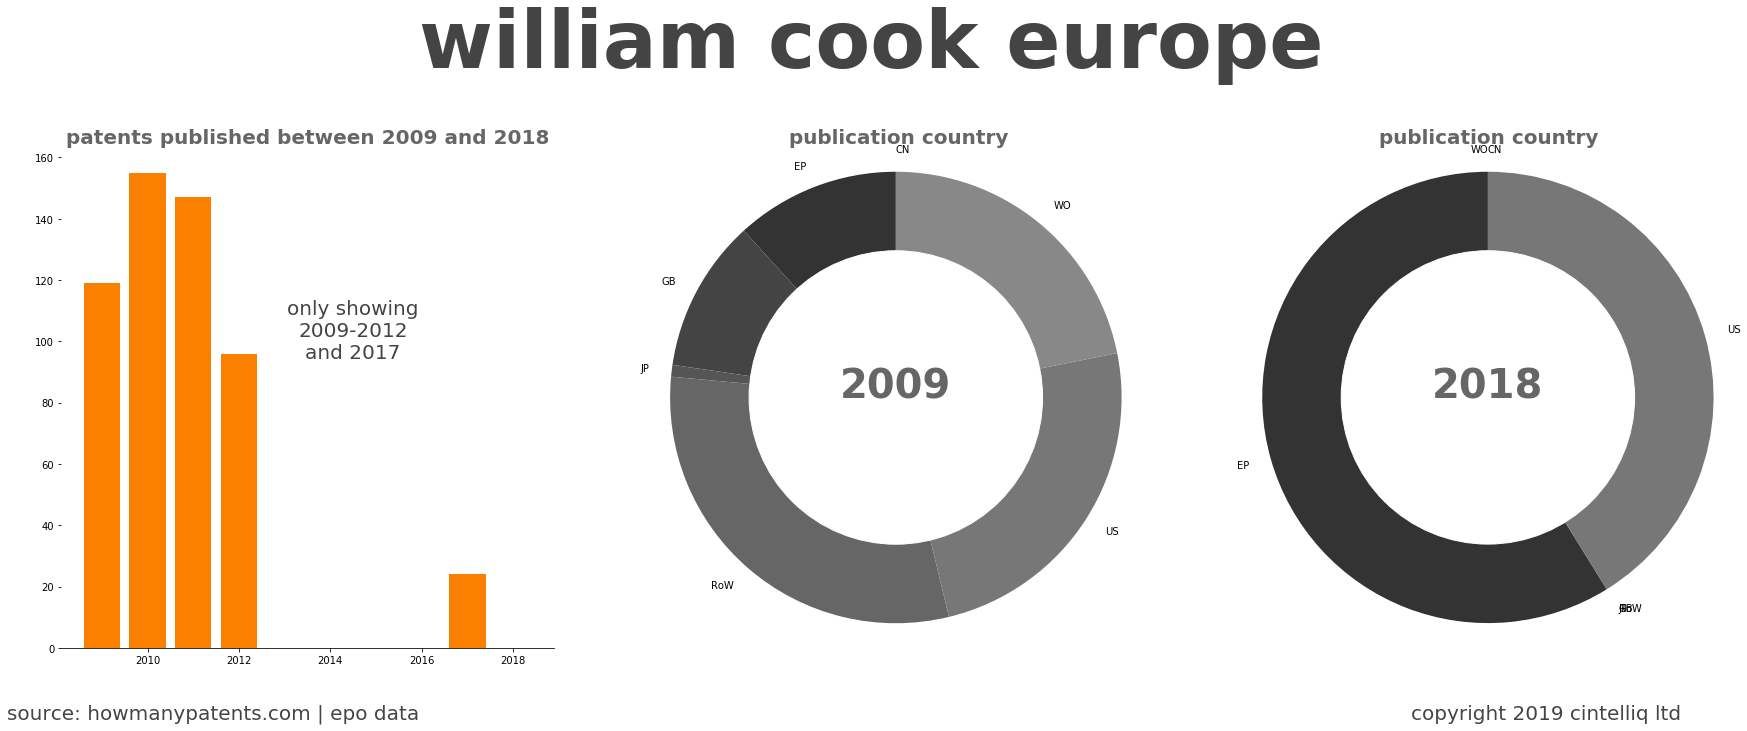 summary of patents for William Cook Europe